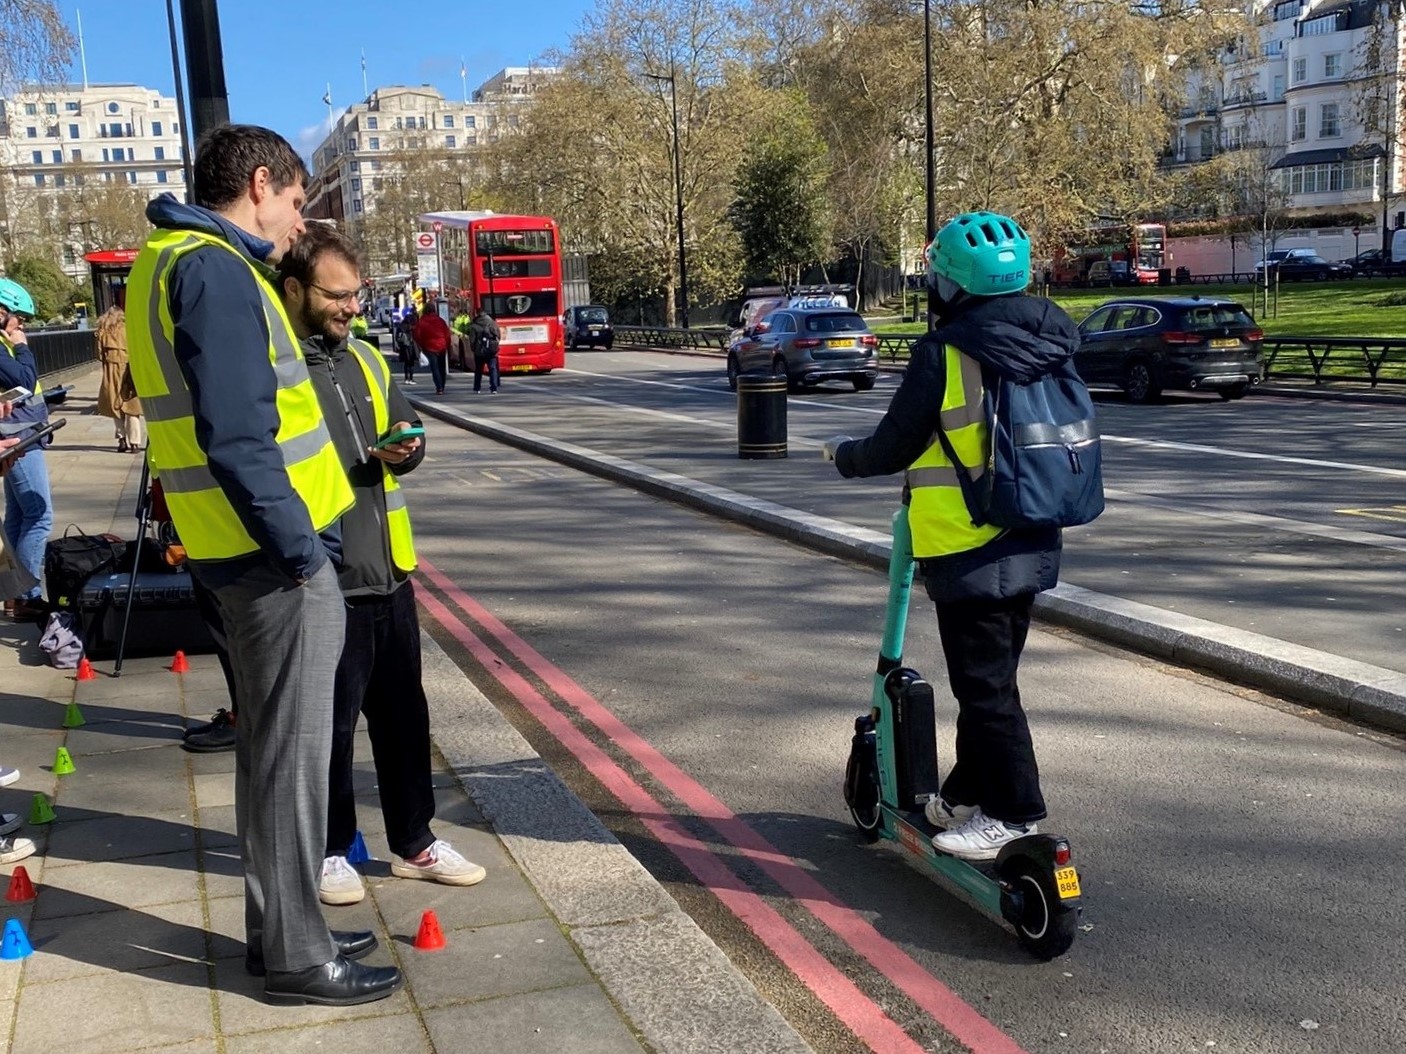 Andy Law, Campaigns Manager for Thomas Pocklington Trust, pictured with a member of the team from UCL Pearl by the edge of the road. They are listening for the AVA on a passing e-scooter.